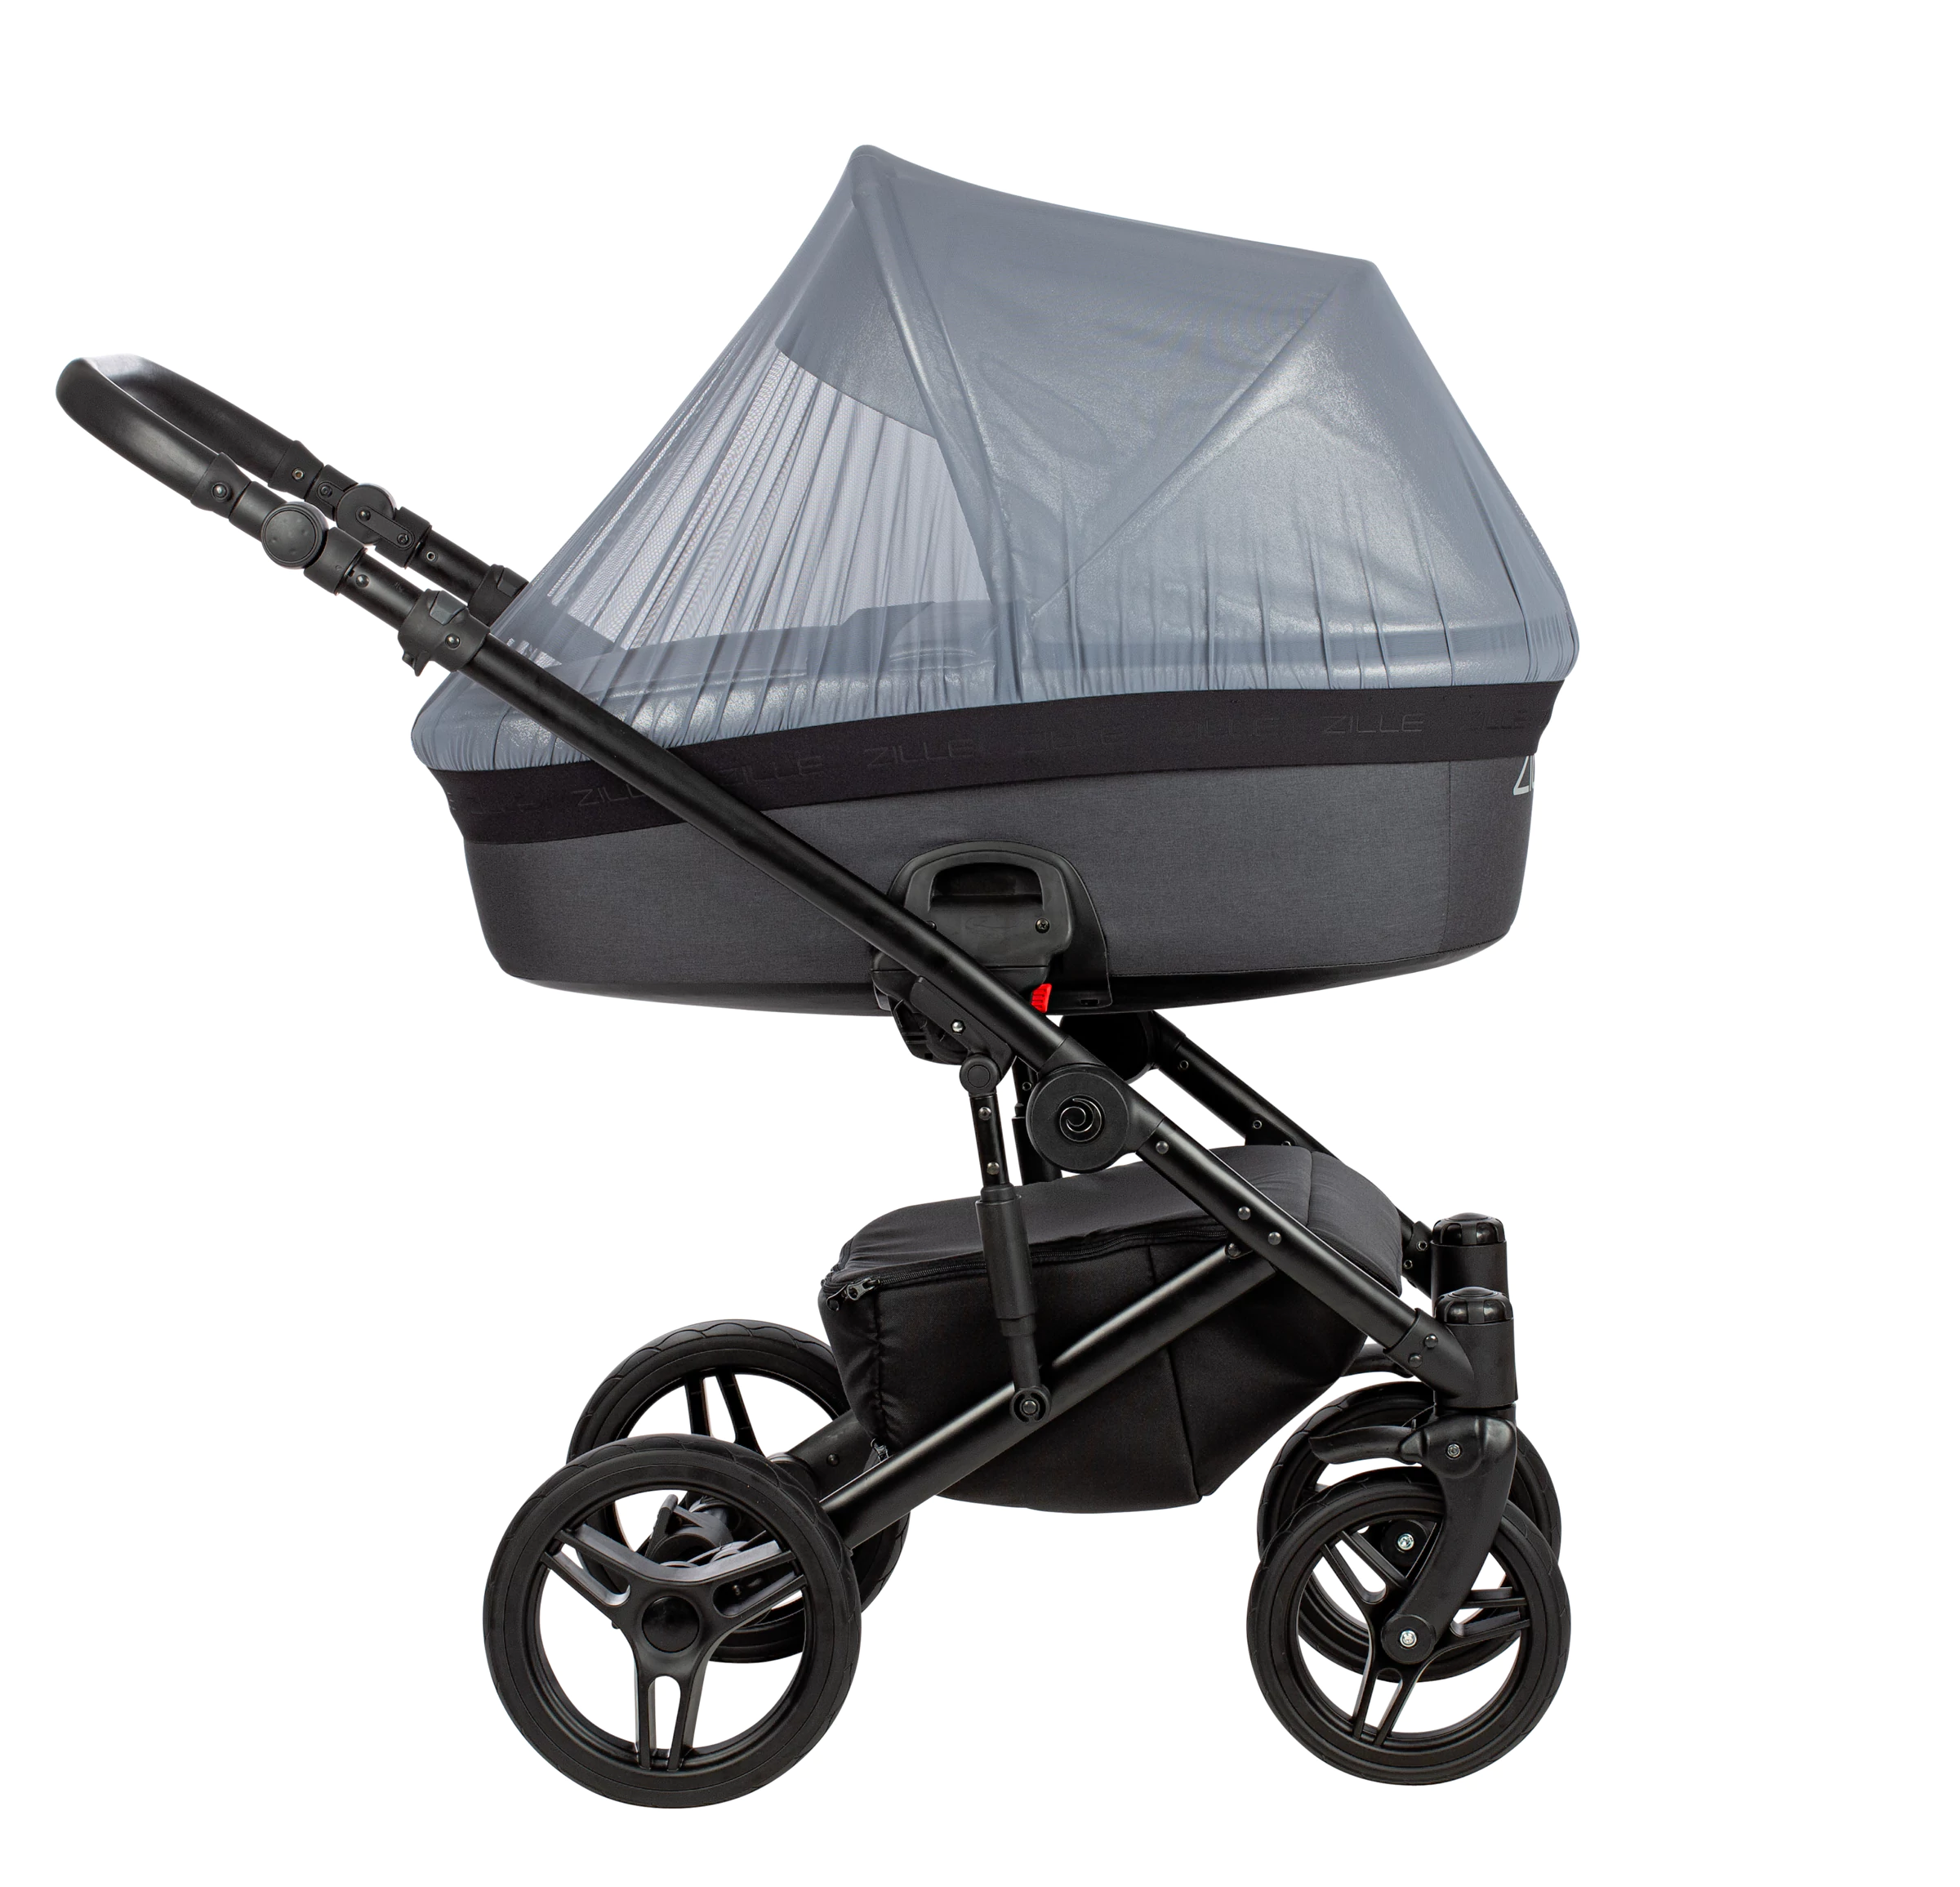 With ZILLE every day is full of travel. So when you relax with your child in the forest or recreation park, ZILLE mosquito net protects your baby preventing various insects from getting inside the stroller.